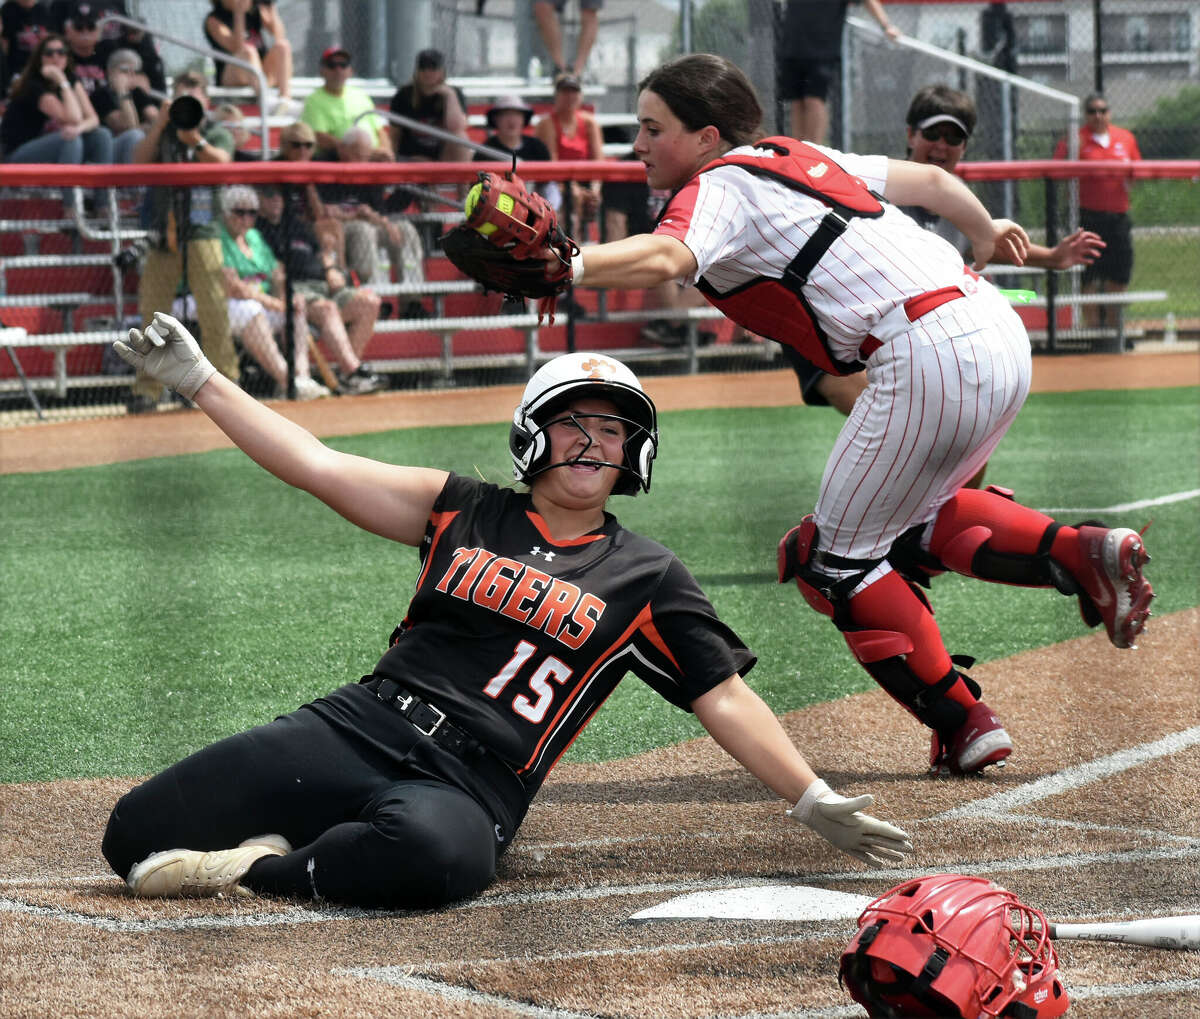 Edwardsville's Sydney Lawrence slides across home plate against Barrington during the third-place game of the Class 4A state tournament at the Louisville Slugger Sports Complex on Saturday in Peoria.